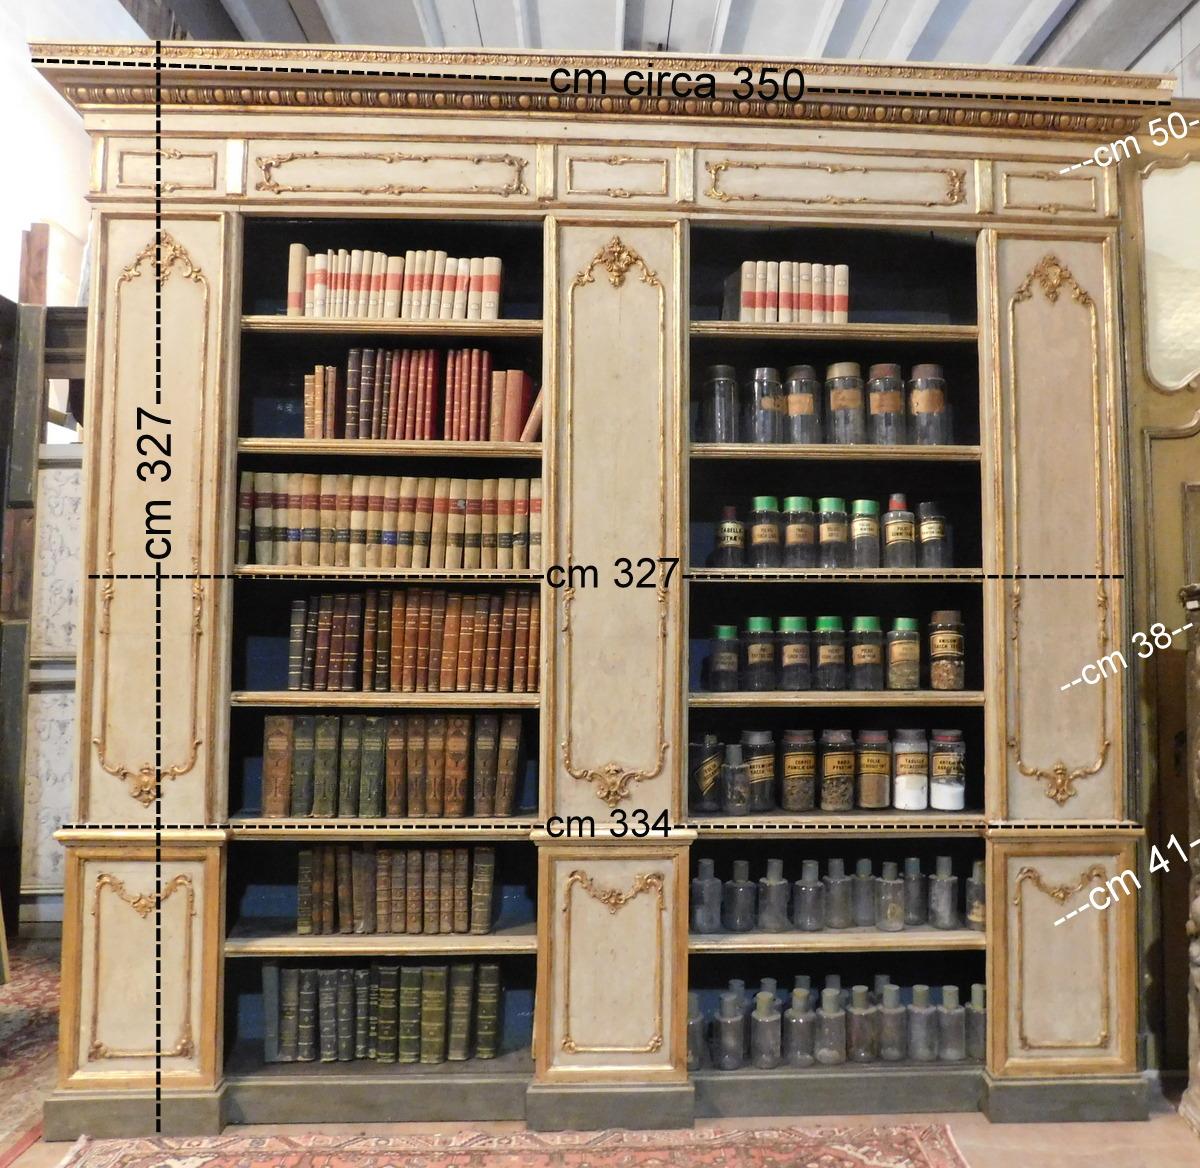 Antique Lacquered Gilded Bookcase, Carved Columns & Friezes, 19th Century Italy For Sale 1